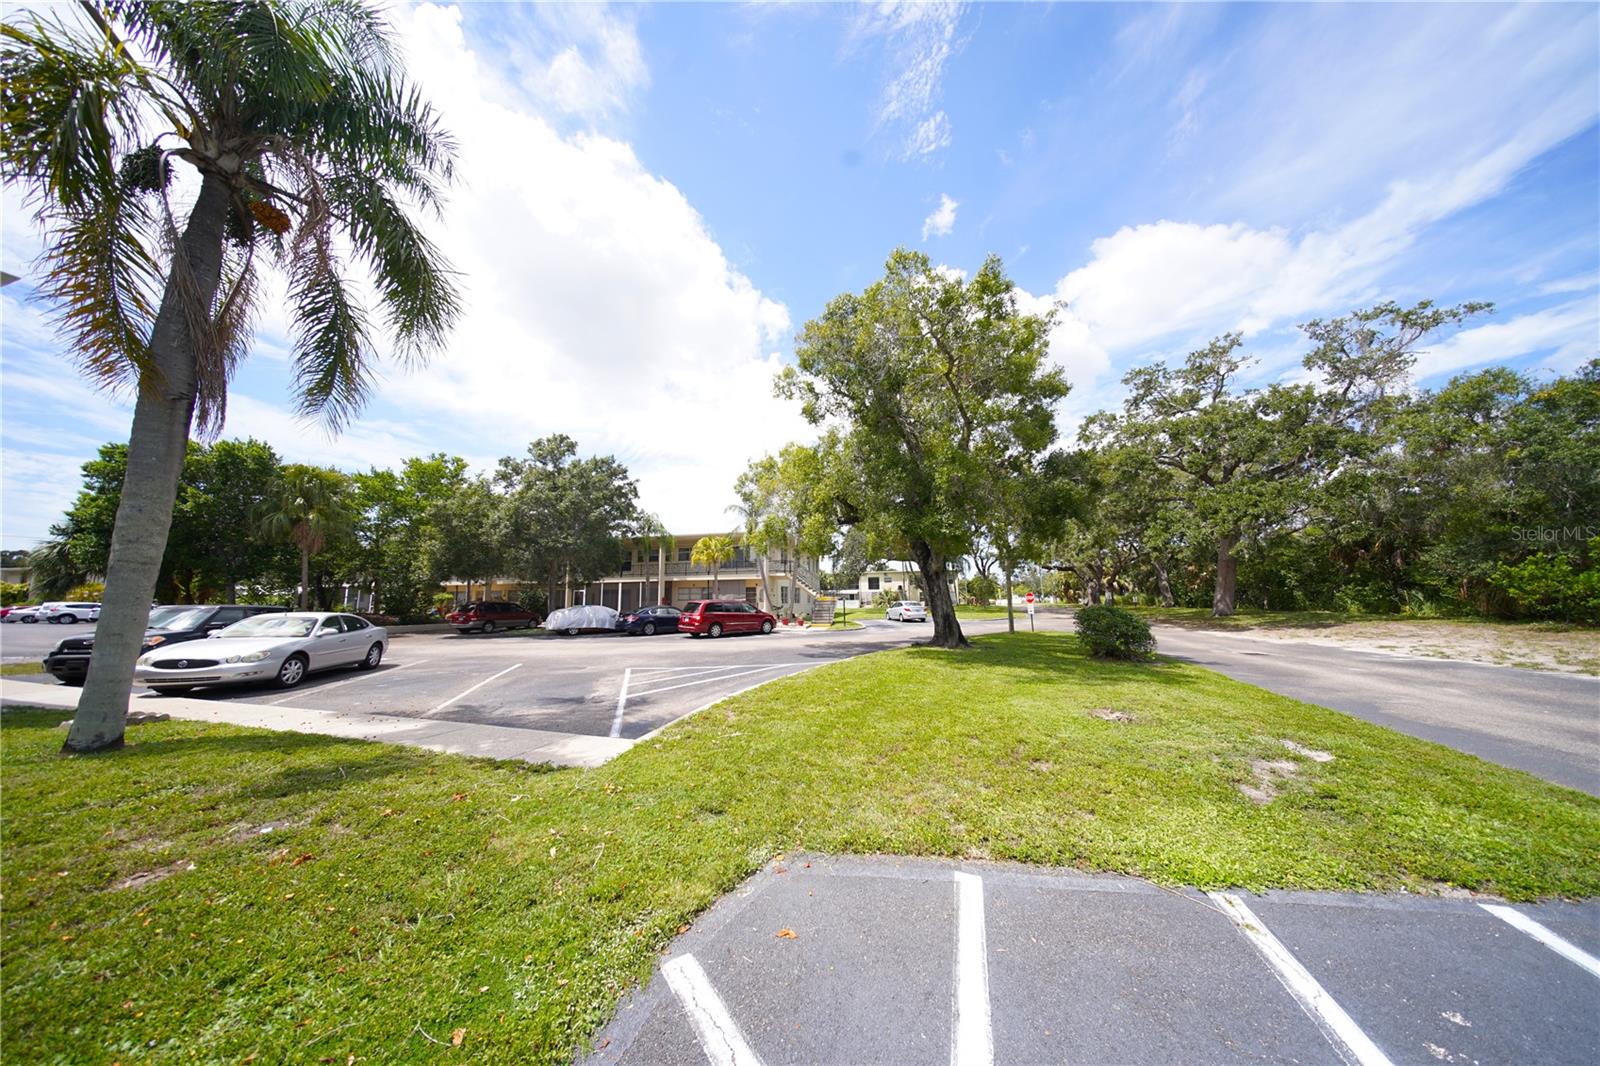 2-bedroom condo in PET FRIENDLY complex with assigned Parking lot visible to the right.